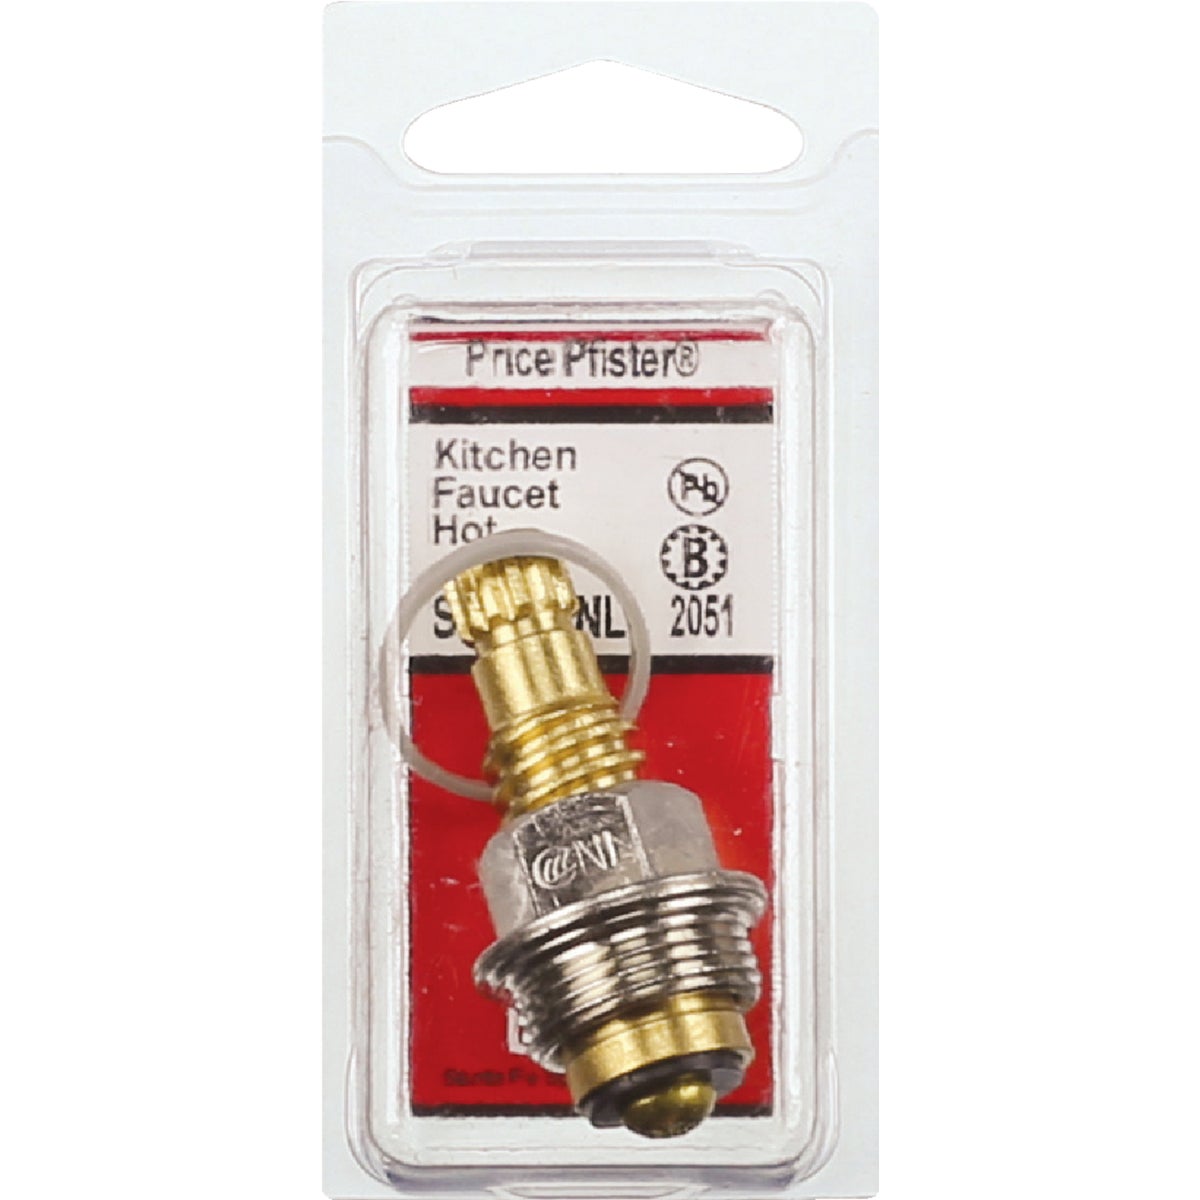 Lasco S-209-1NL Lasco Hot Water Price Pfister No. 2051 or No. 2052 Faucet Stem S-209-1NL